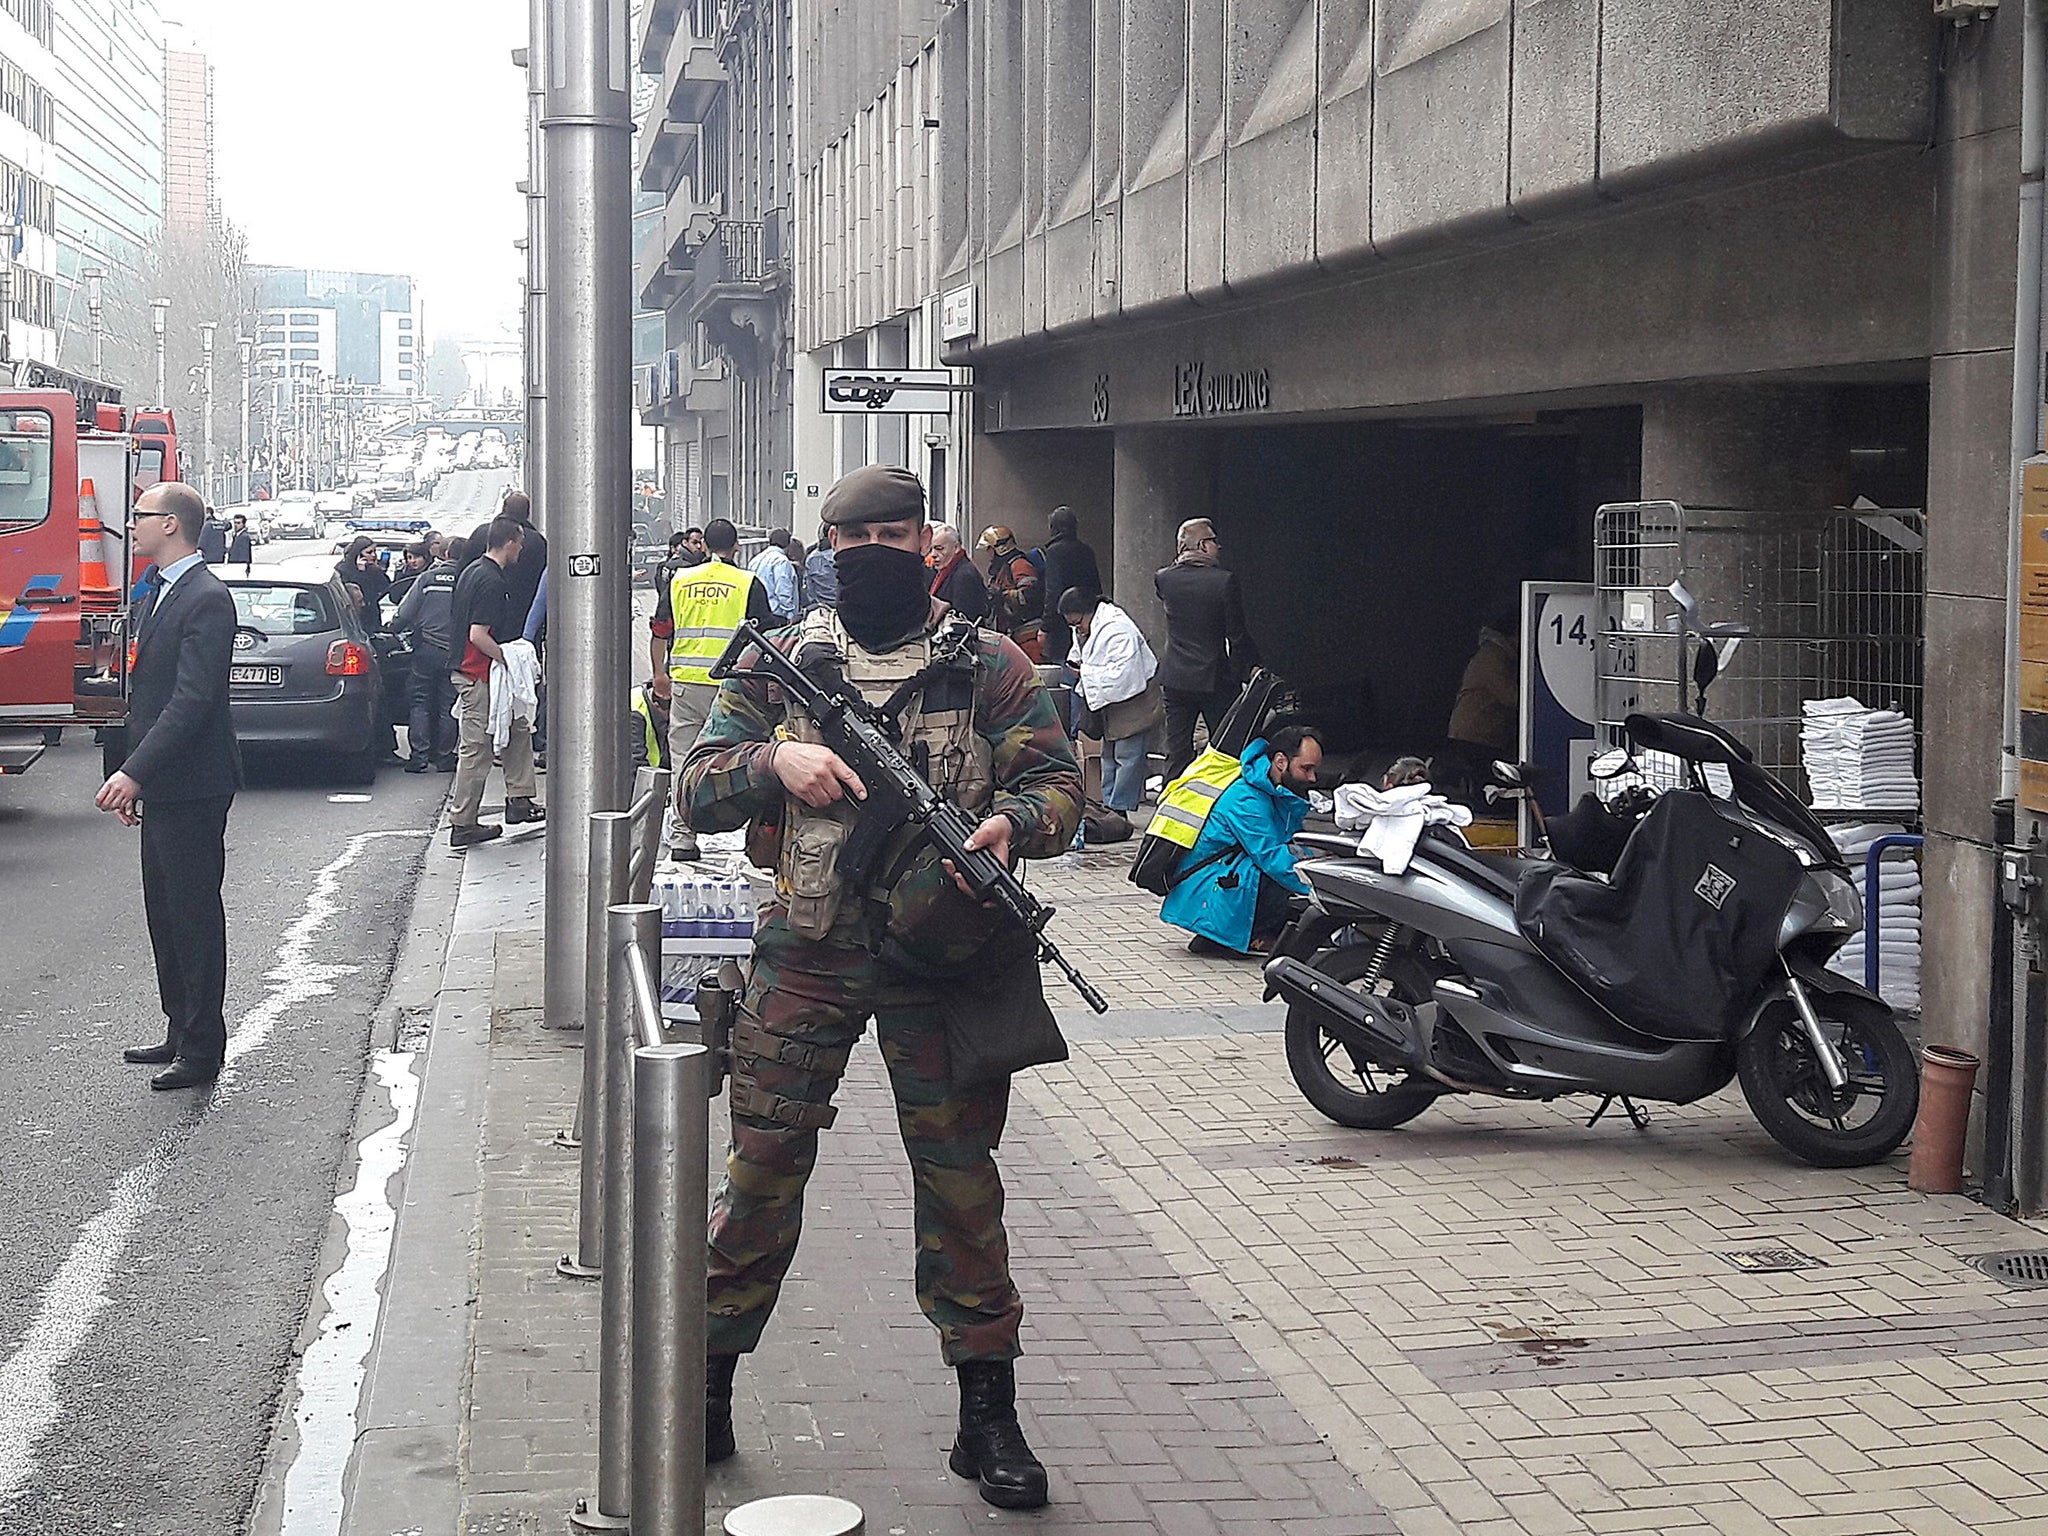 A Belgian soldier stands guard outside the Maalbeek metro station in Brussels after a blast at this station located near the EU institutions